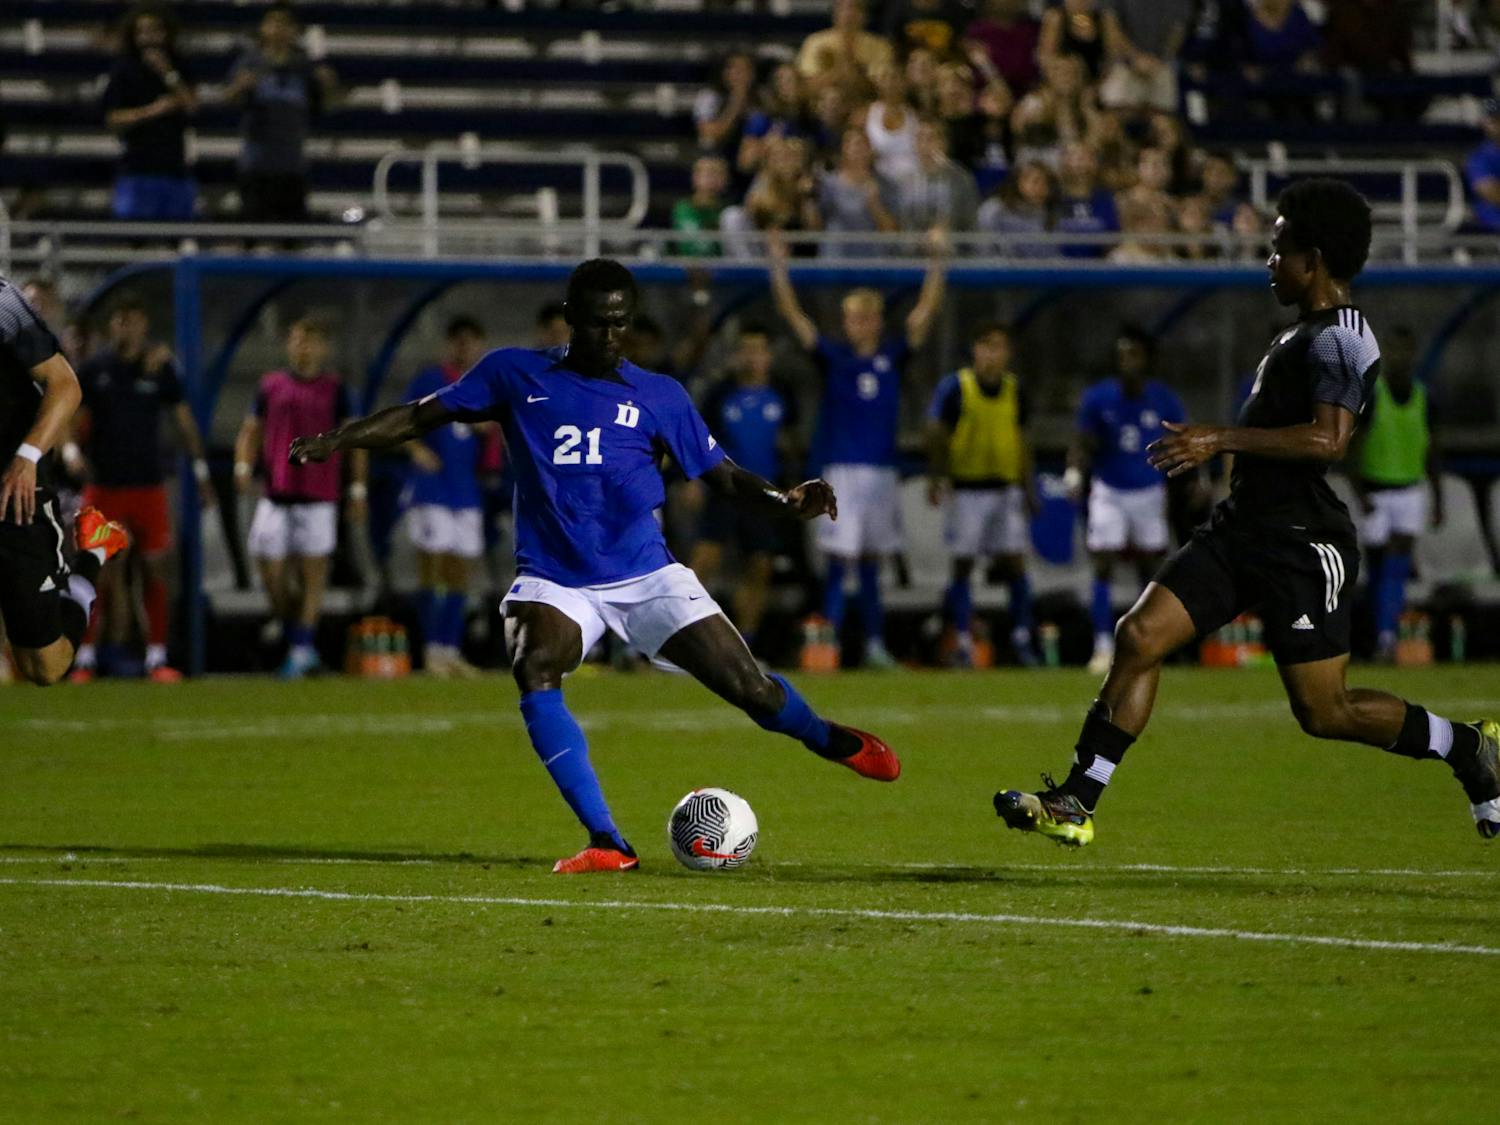 Graduate forward Forster Ajago lines up a shot in Duke's draw with Wofford.